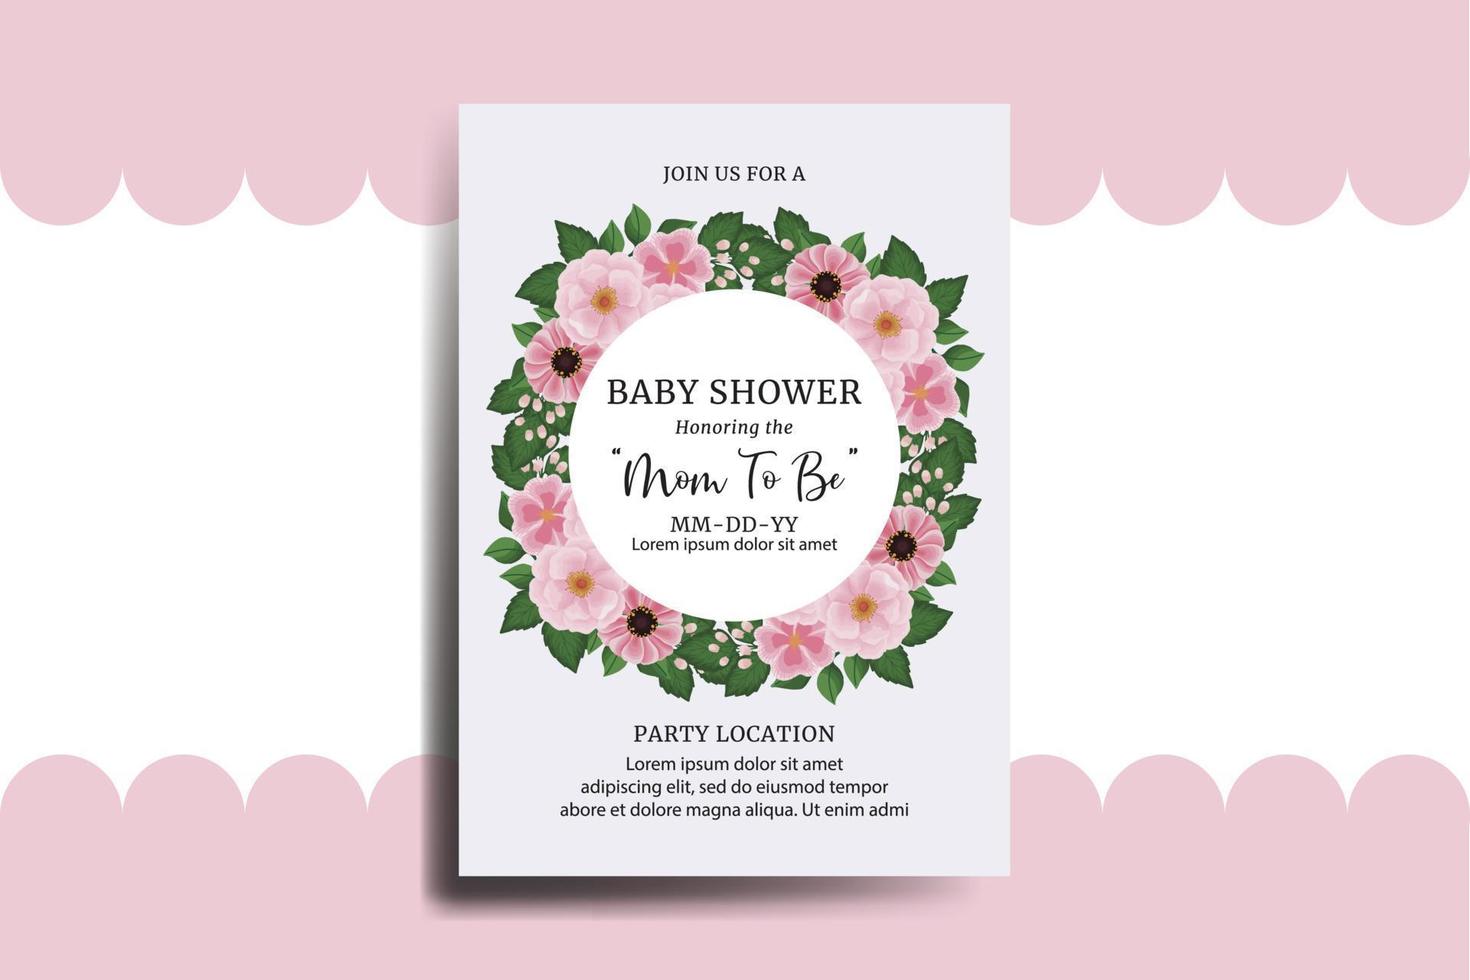 Baby Shower Greeting Card Zinnia and Peony flower Design Template vector